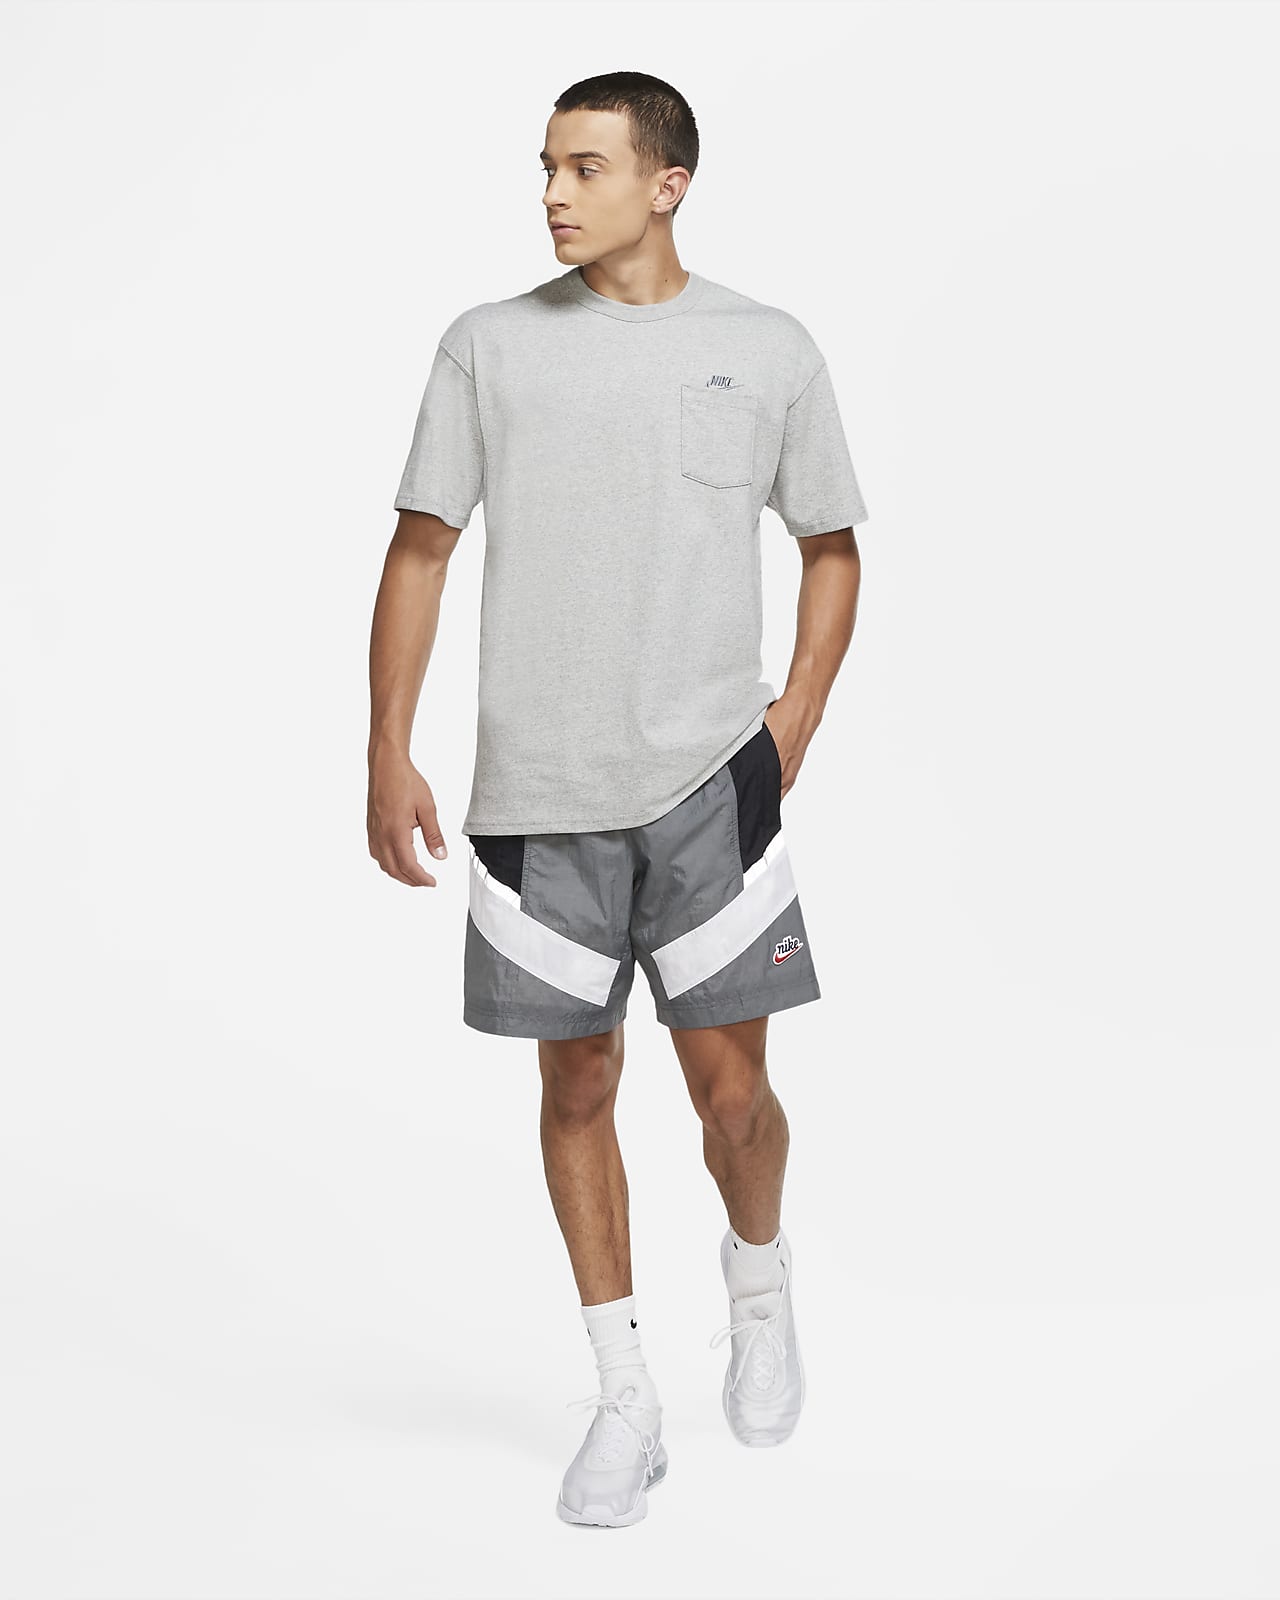 Buy > grey nike shorts and t shirt > in stock